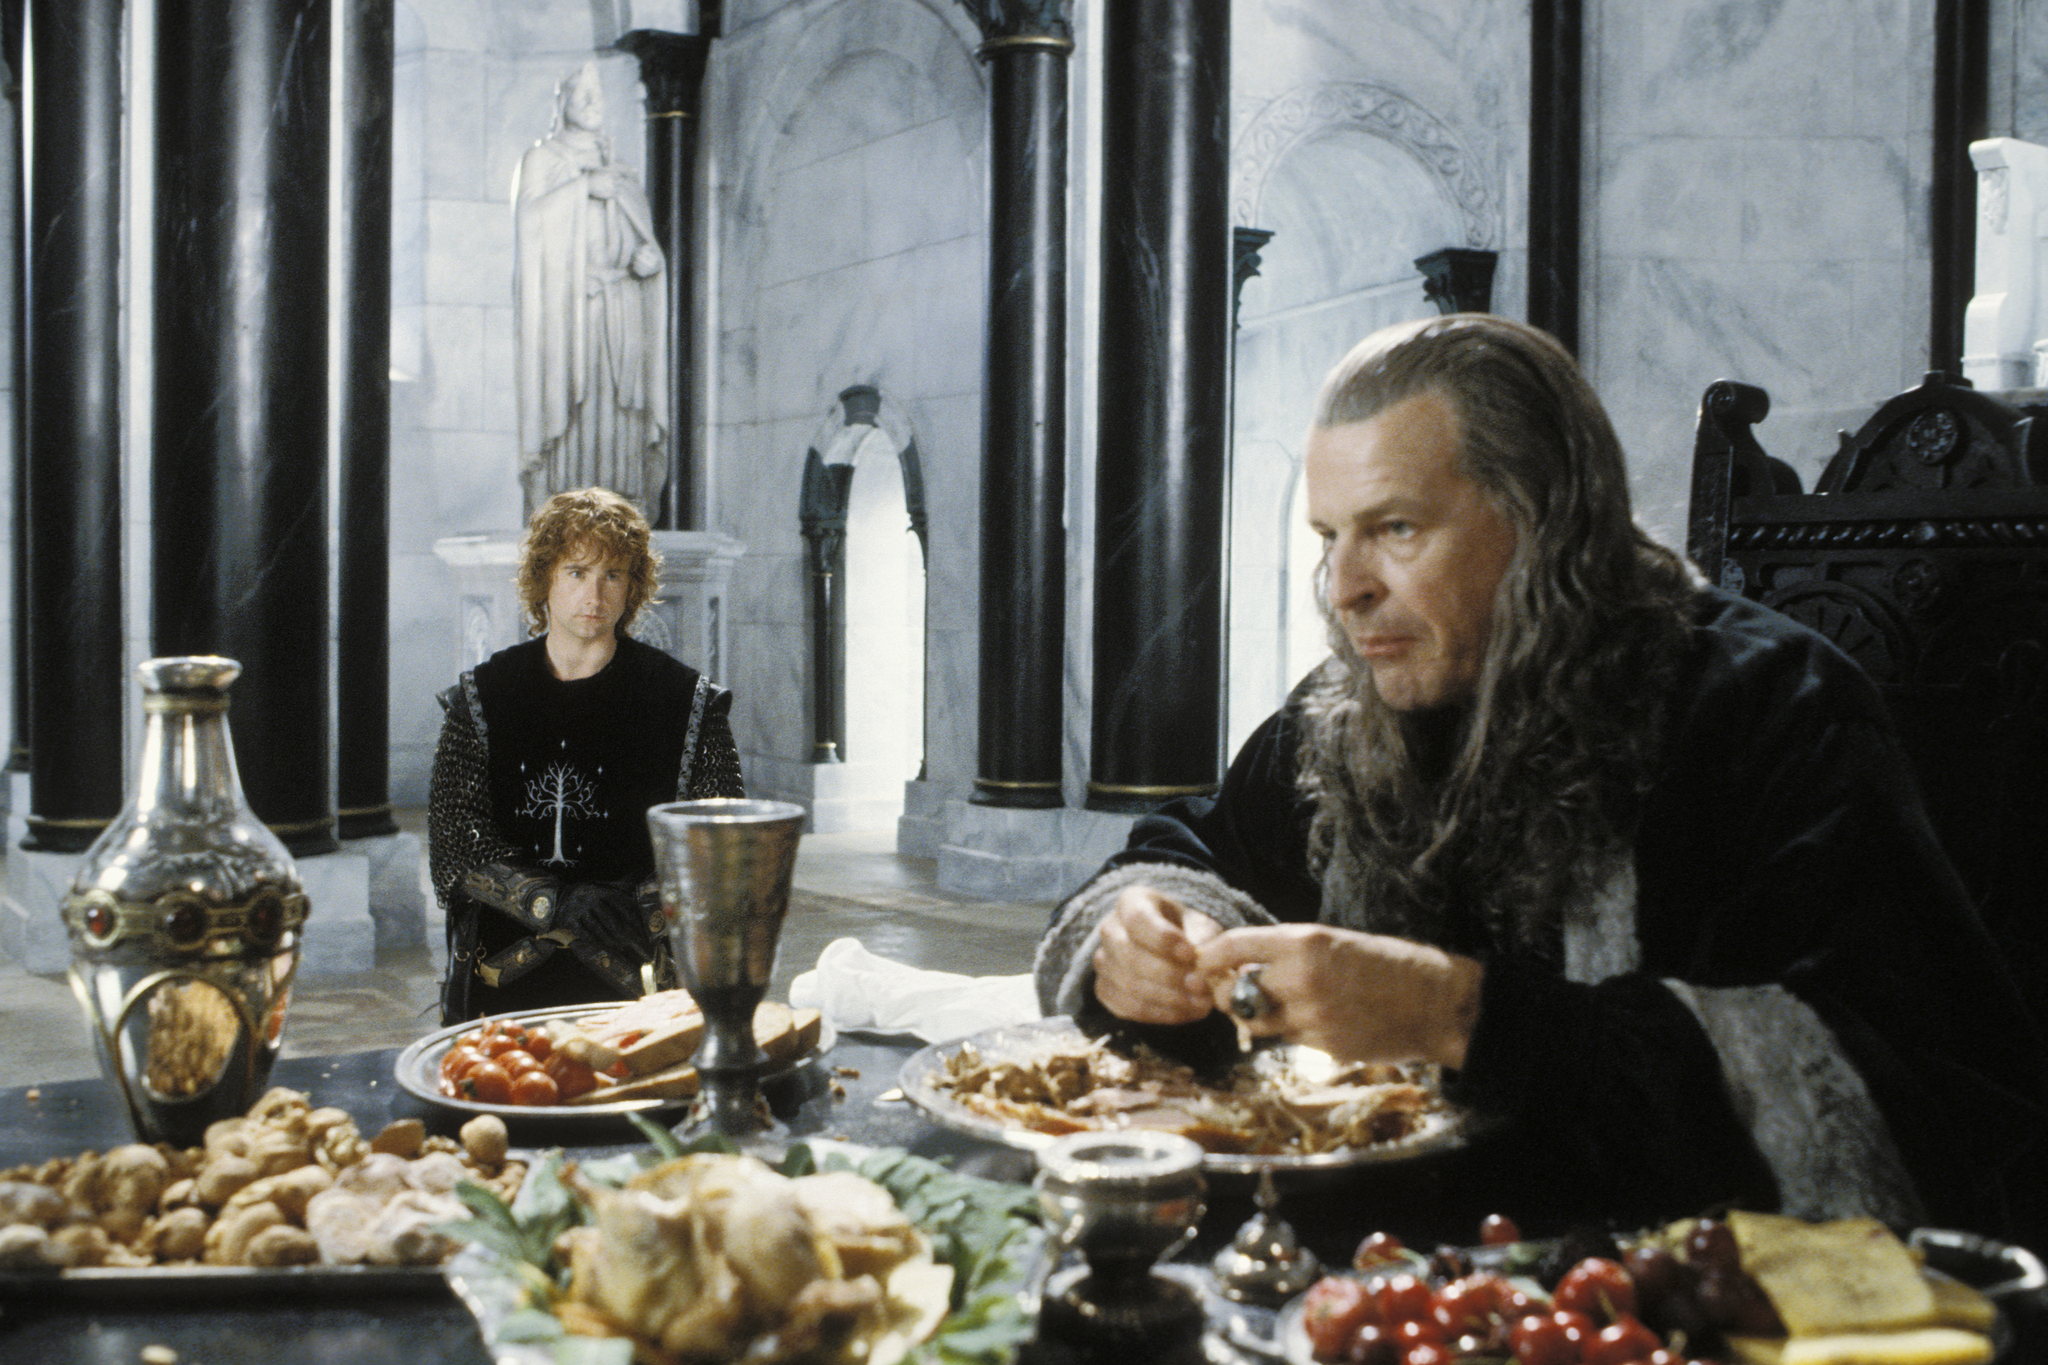 Billy Boyd and John Noble in The Lord of the Rings: The Return of the King (2003)